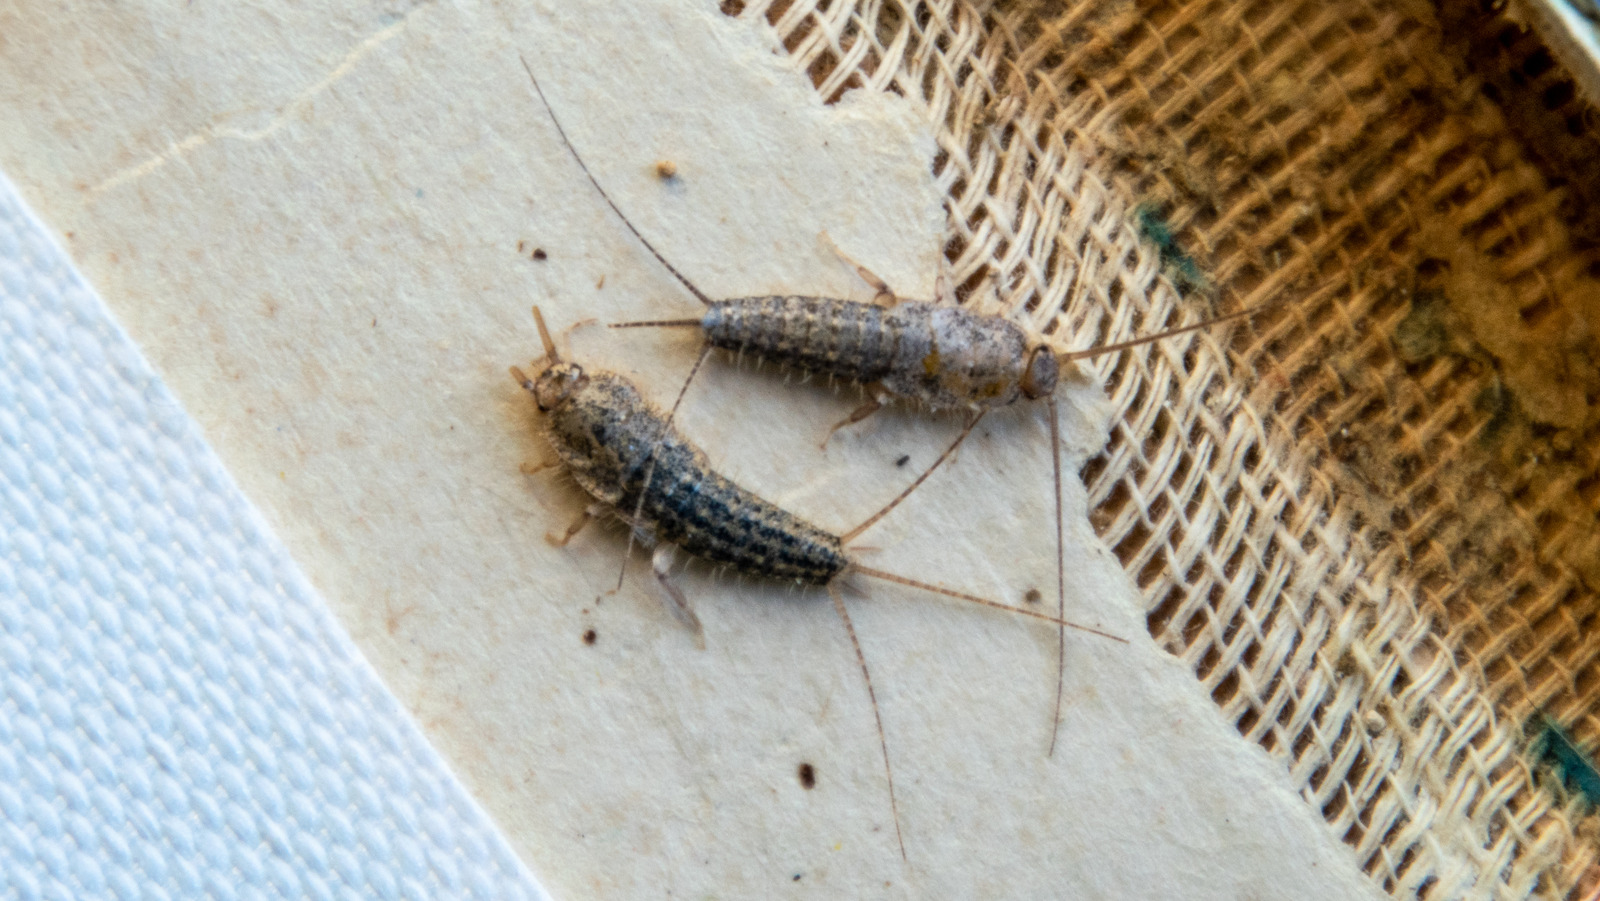 https://www.housedigest.com/img/gallery/the-strong-scent-thatll-drive-silverfish-out-of-the-house/l-intro-1700629168.jpg